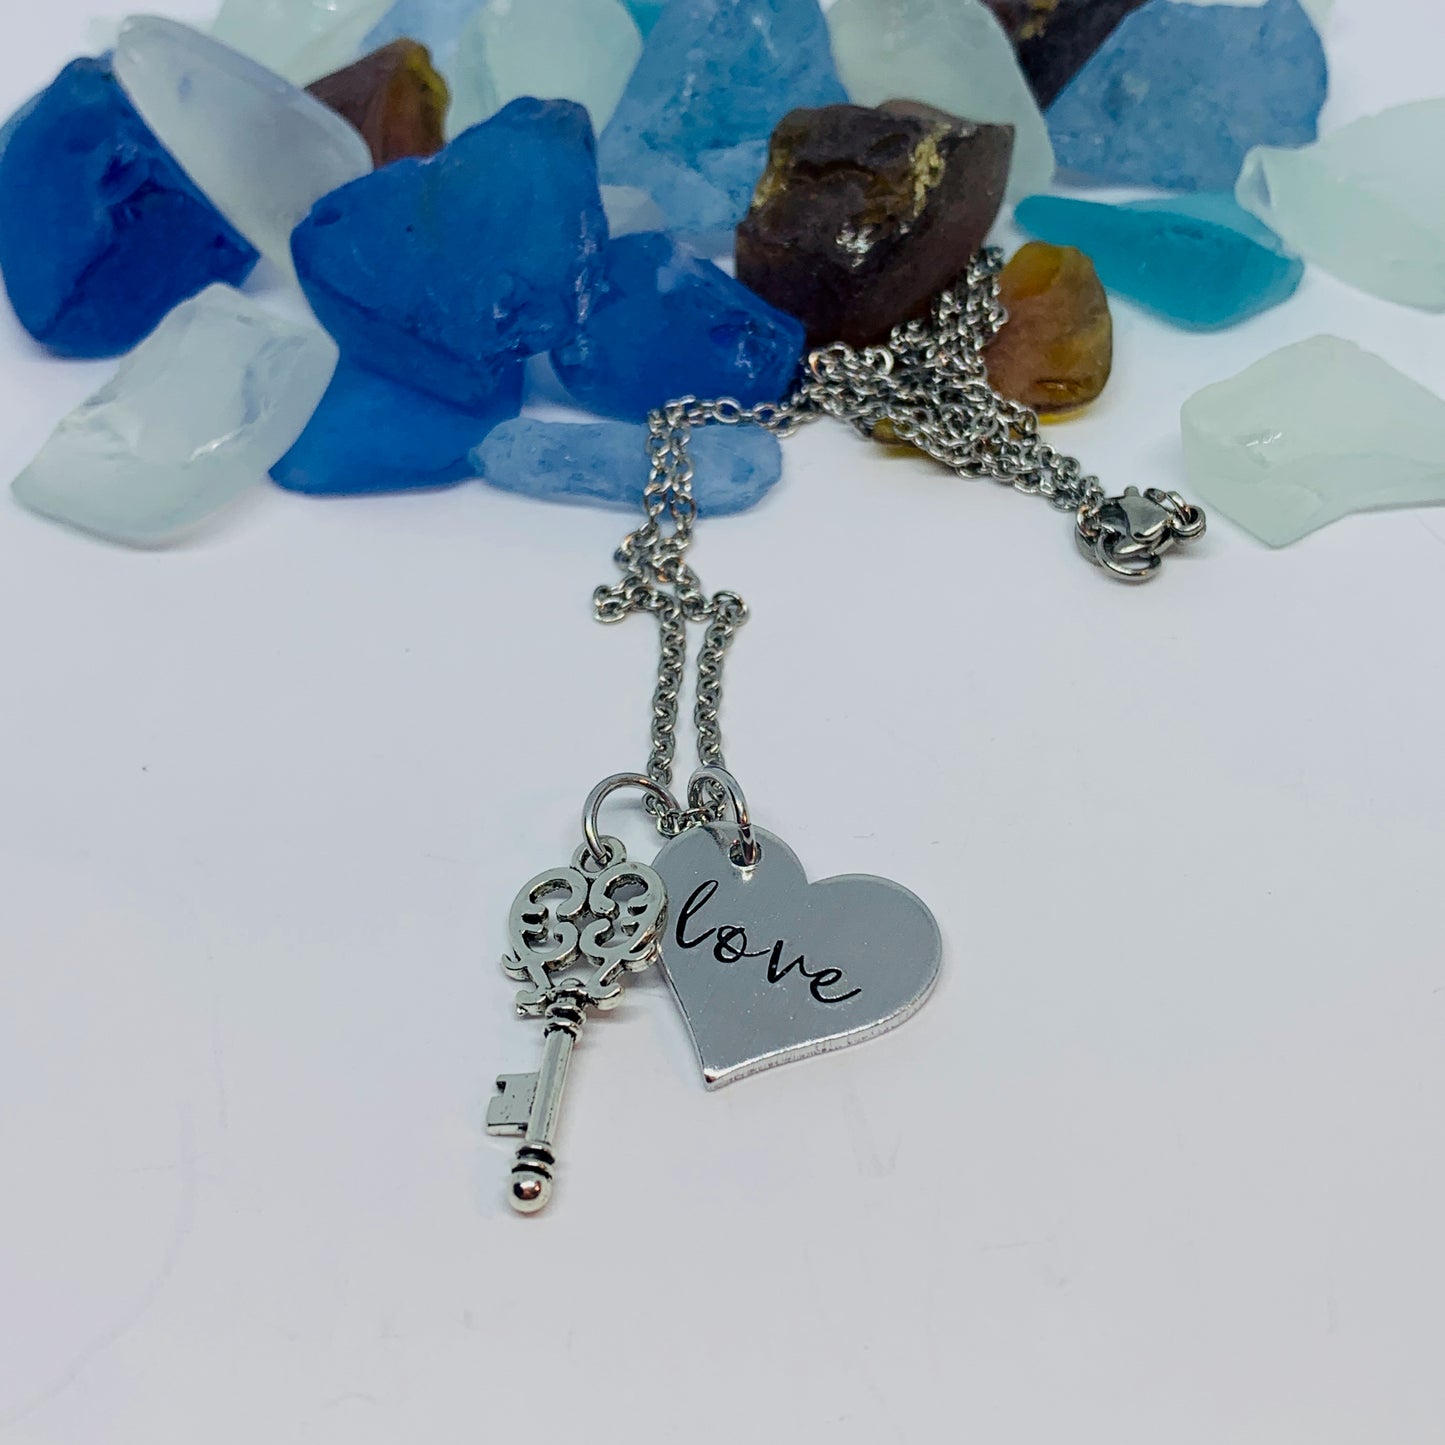 Love Heart and Key Necklace | Valentine Jewelry | Lock and Key Romantic Gift